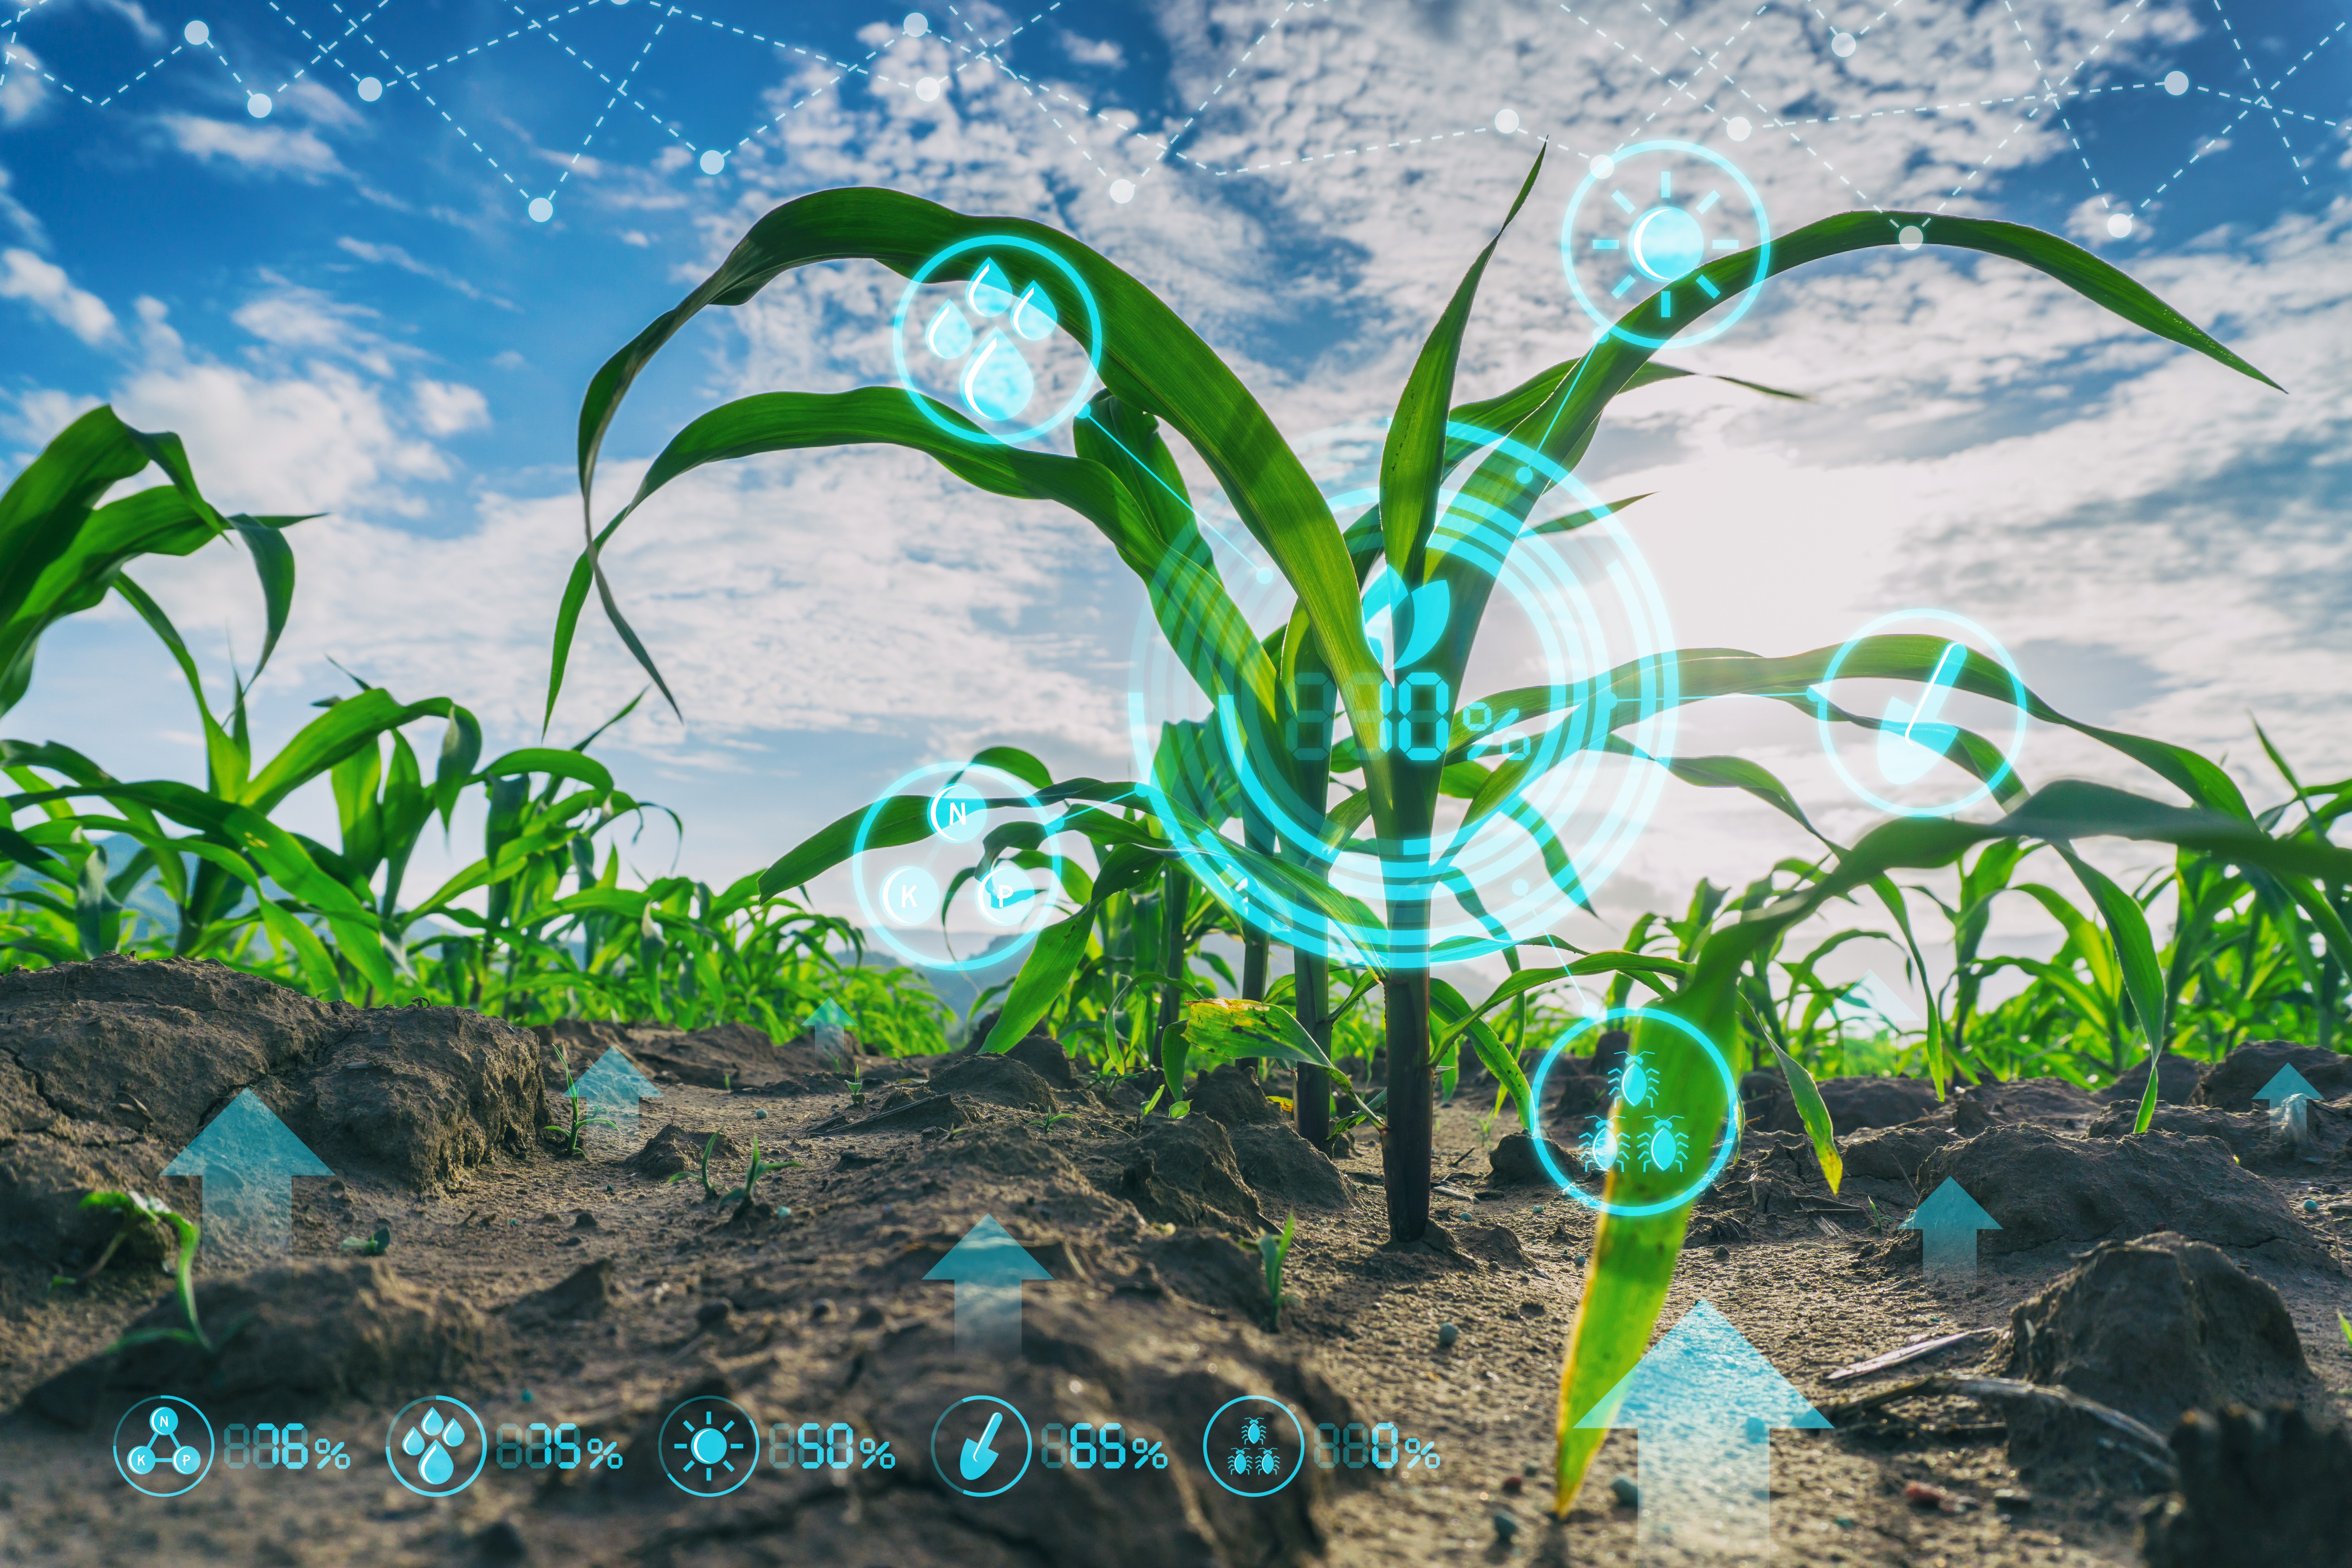 Artificial Intelligience in Agriculture